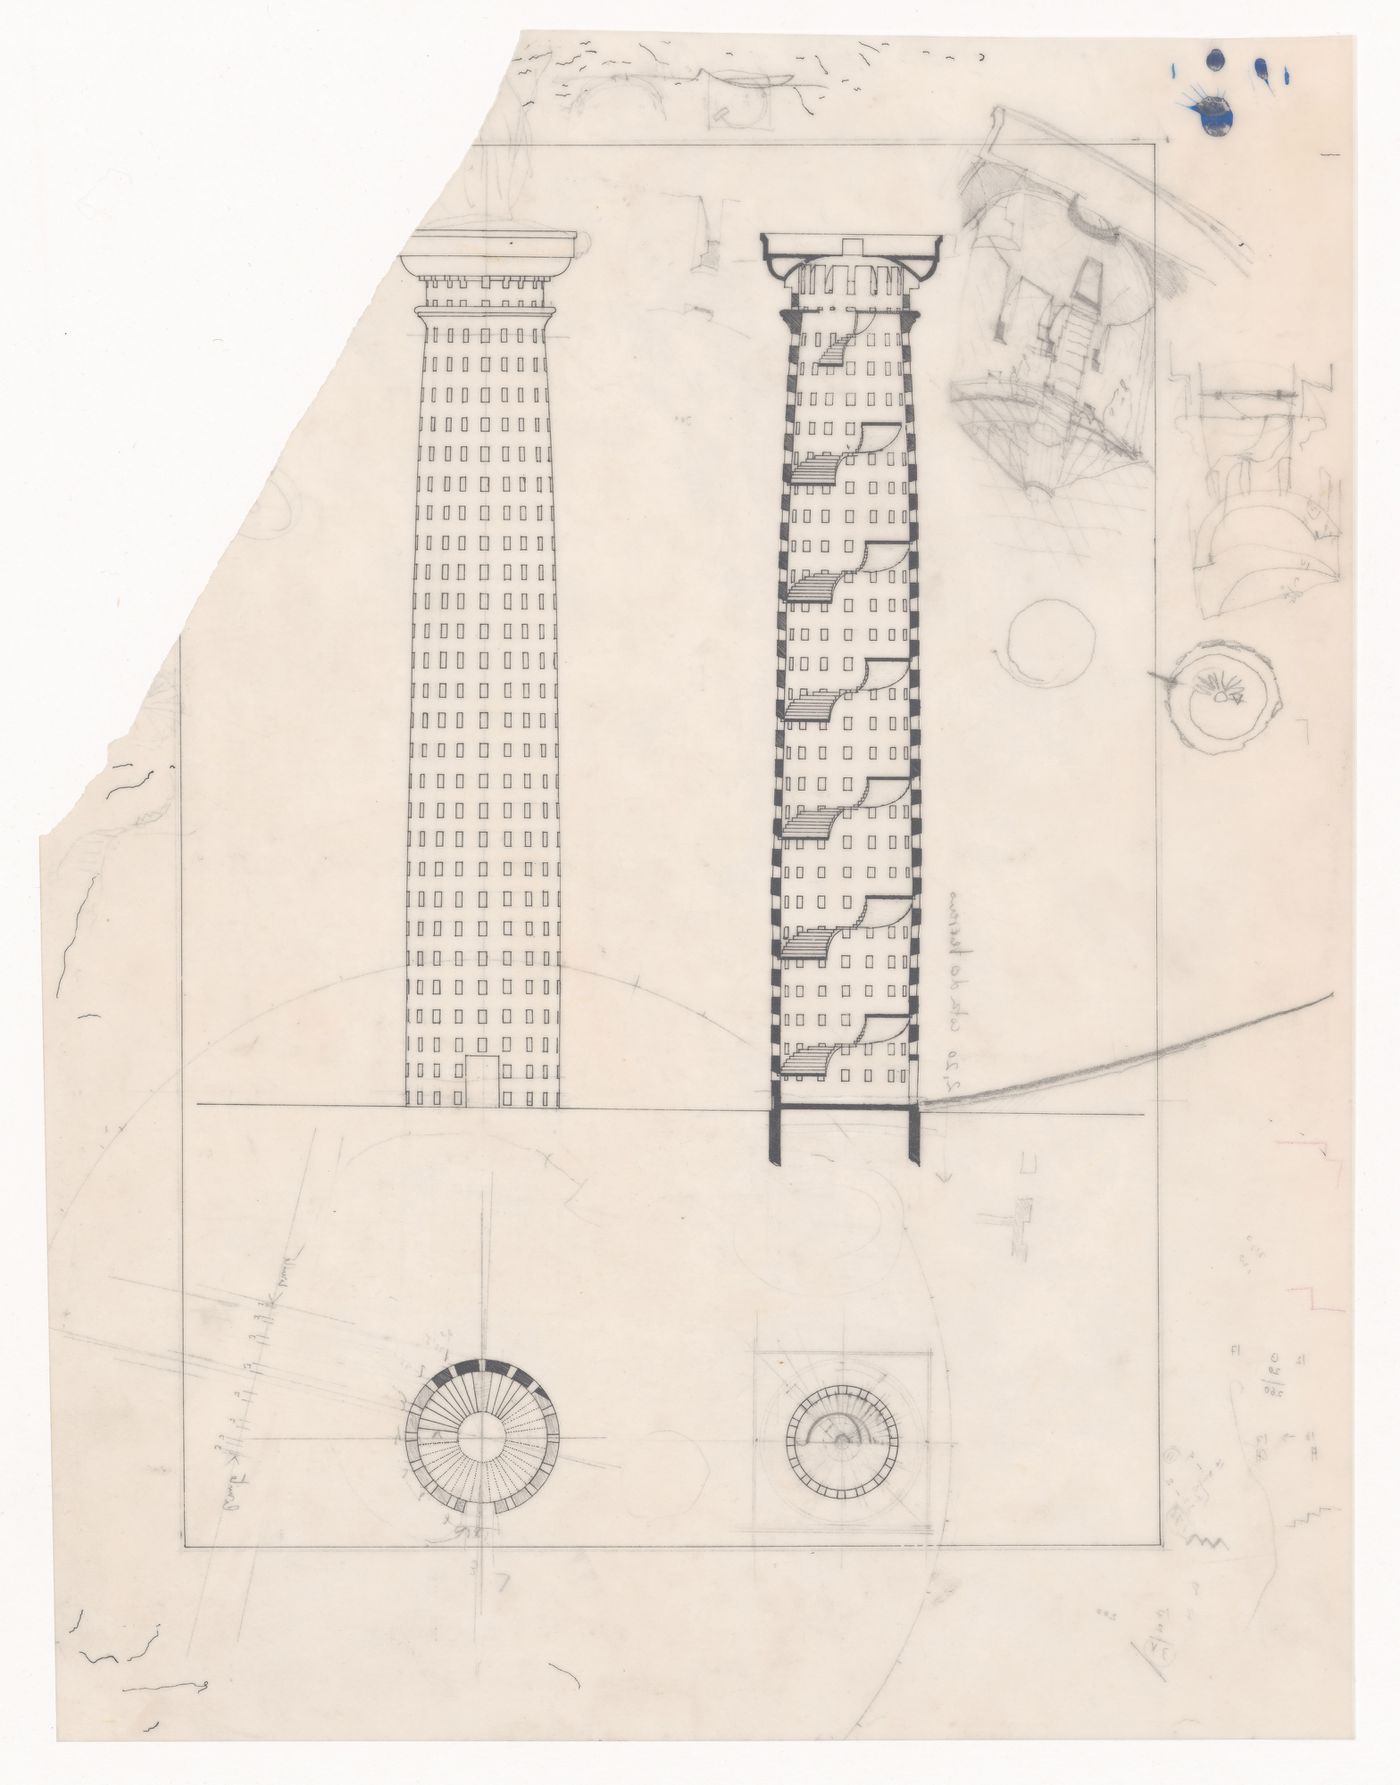 Elevation and section for Monument to Gestapo victims, Berlin